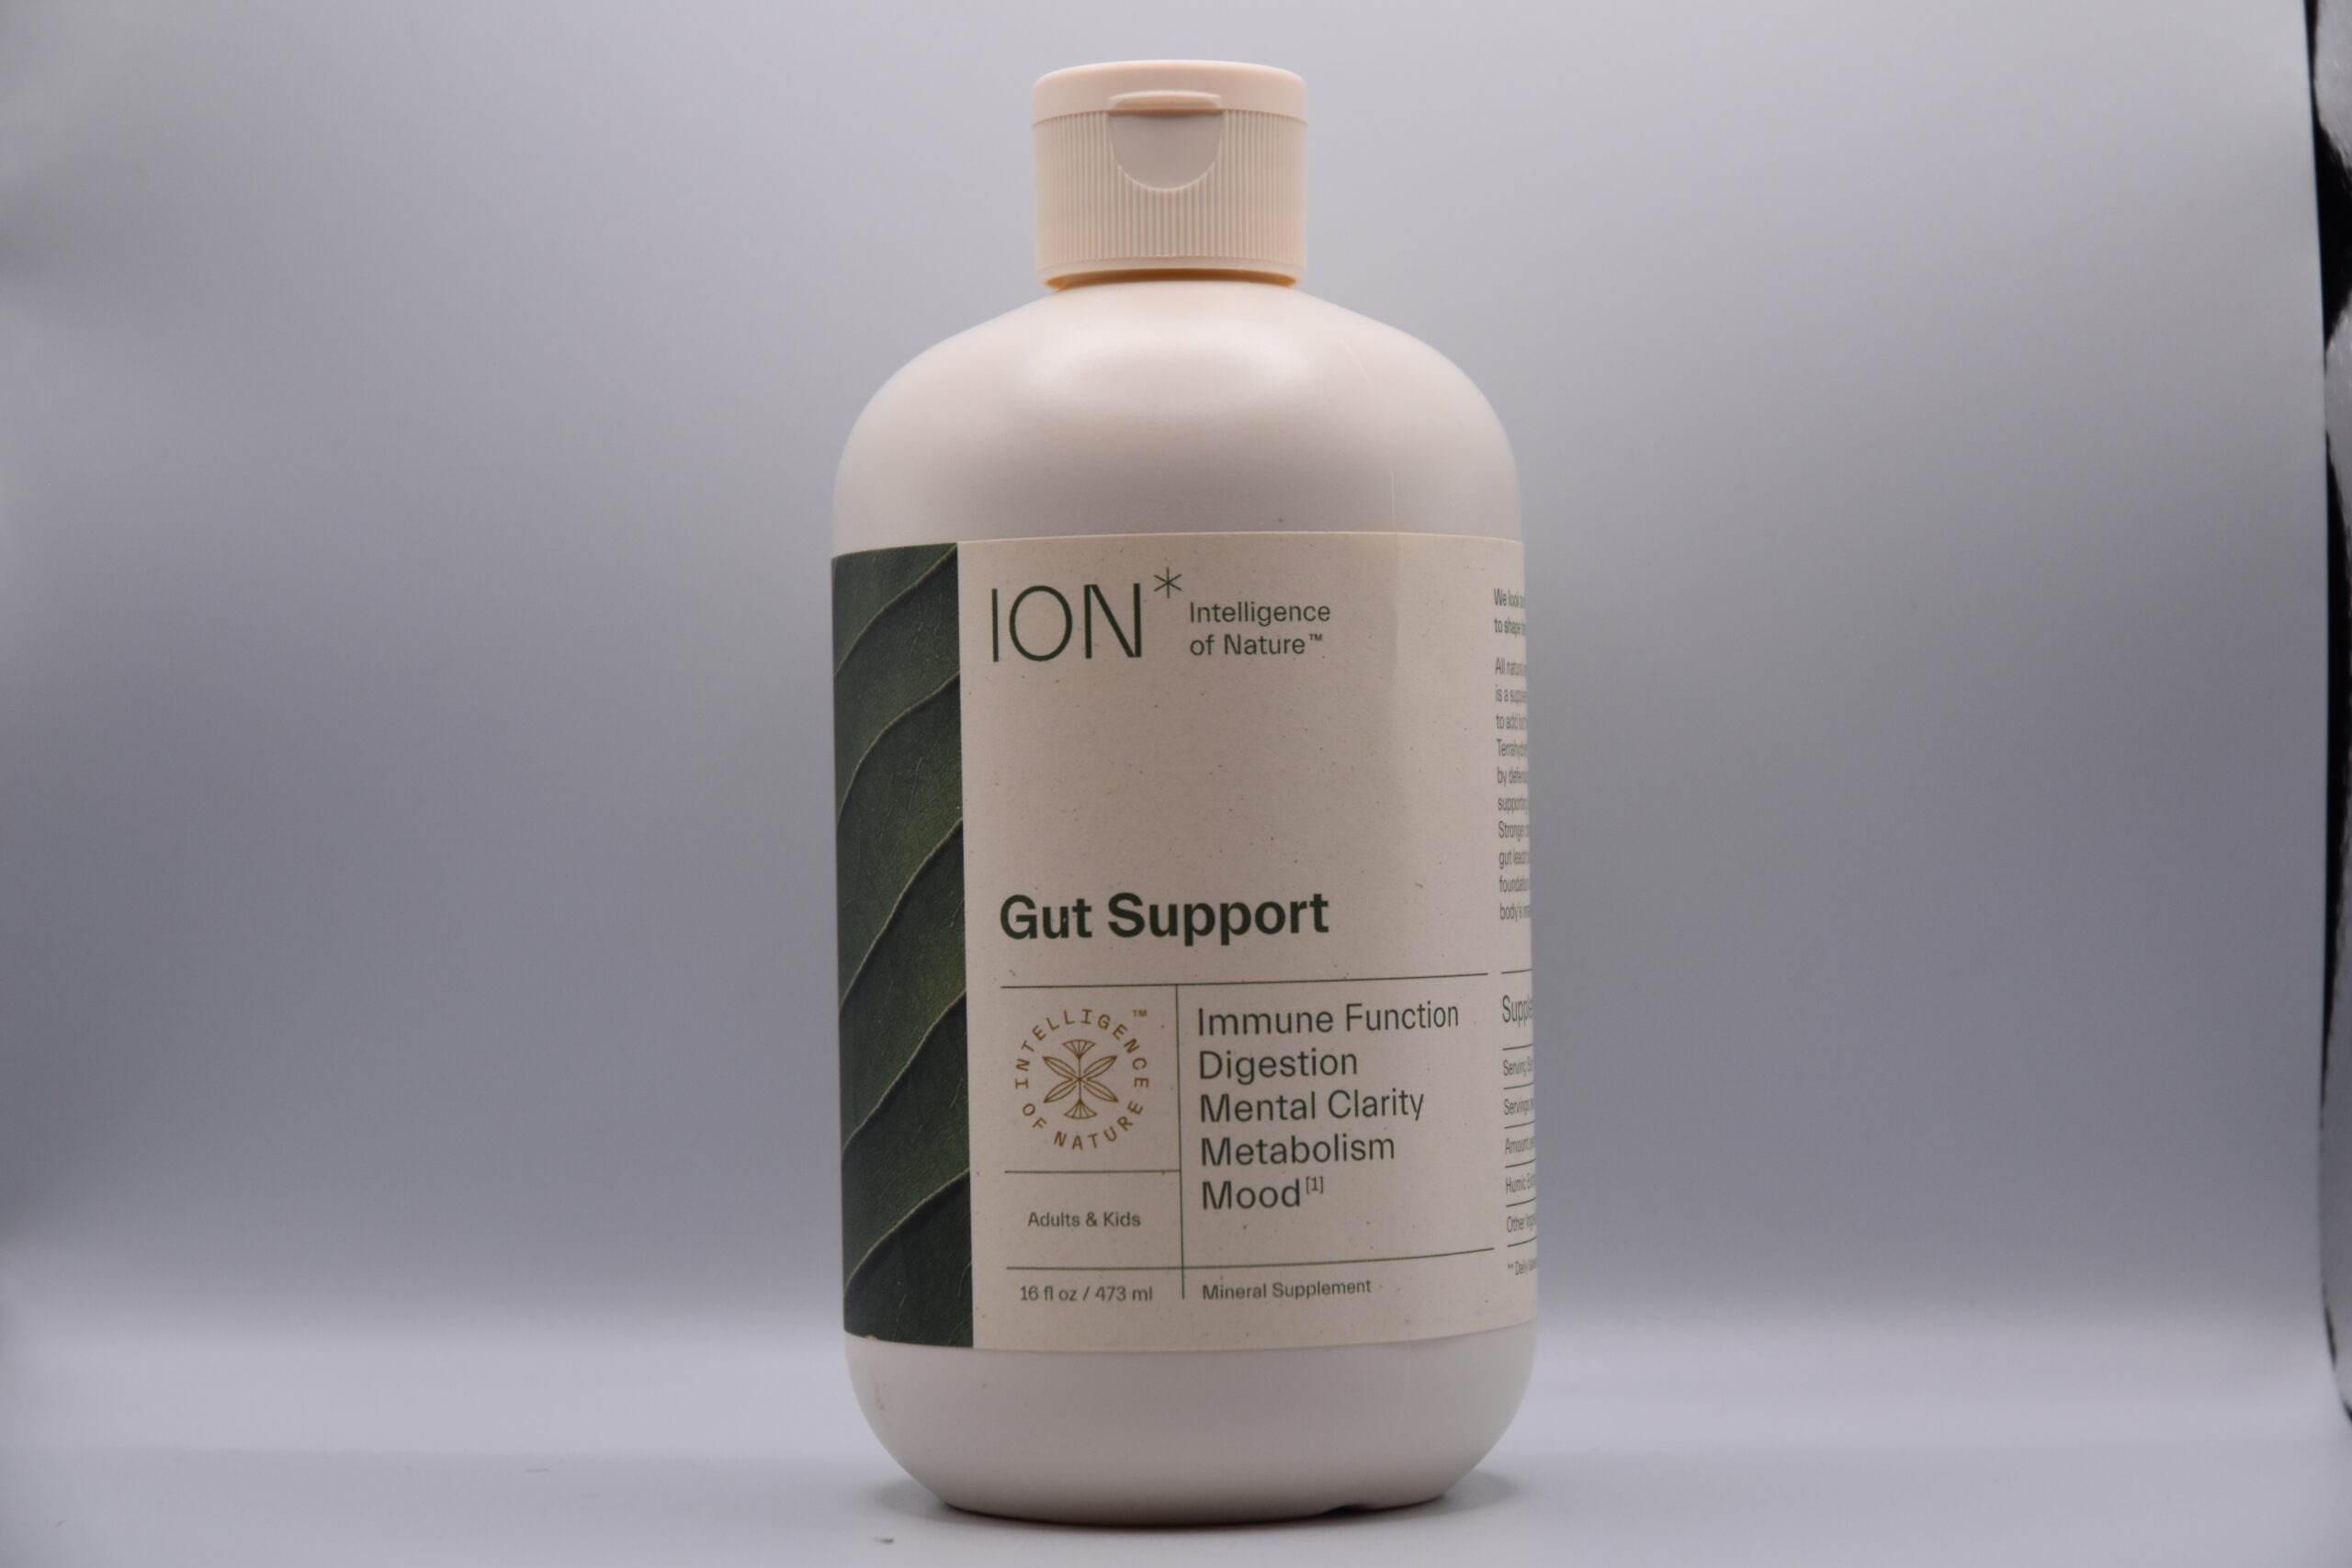 A bottle of Ion Gut Health / Restore - 8oz dietary supplement against a neutral background, advertising benefits for immune function, digestion, mental clarity, metabolism, and mood.